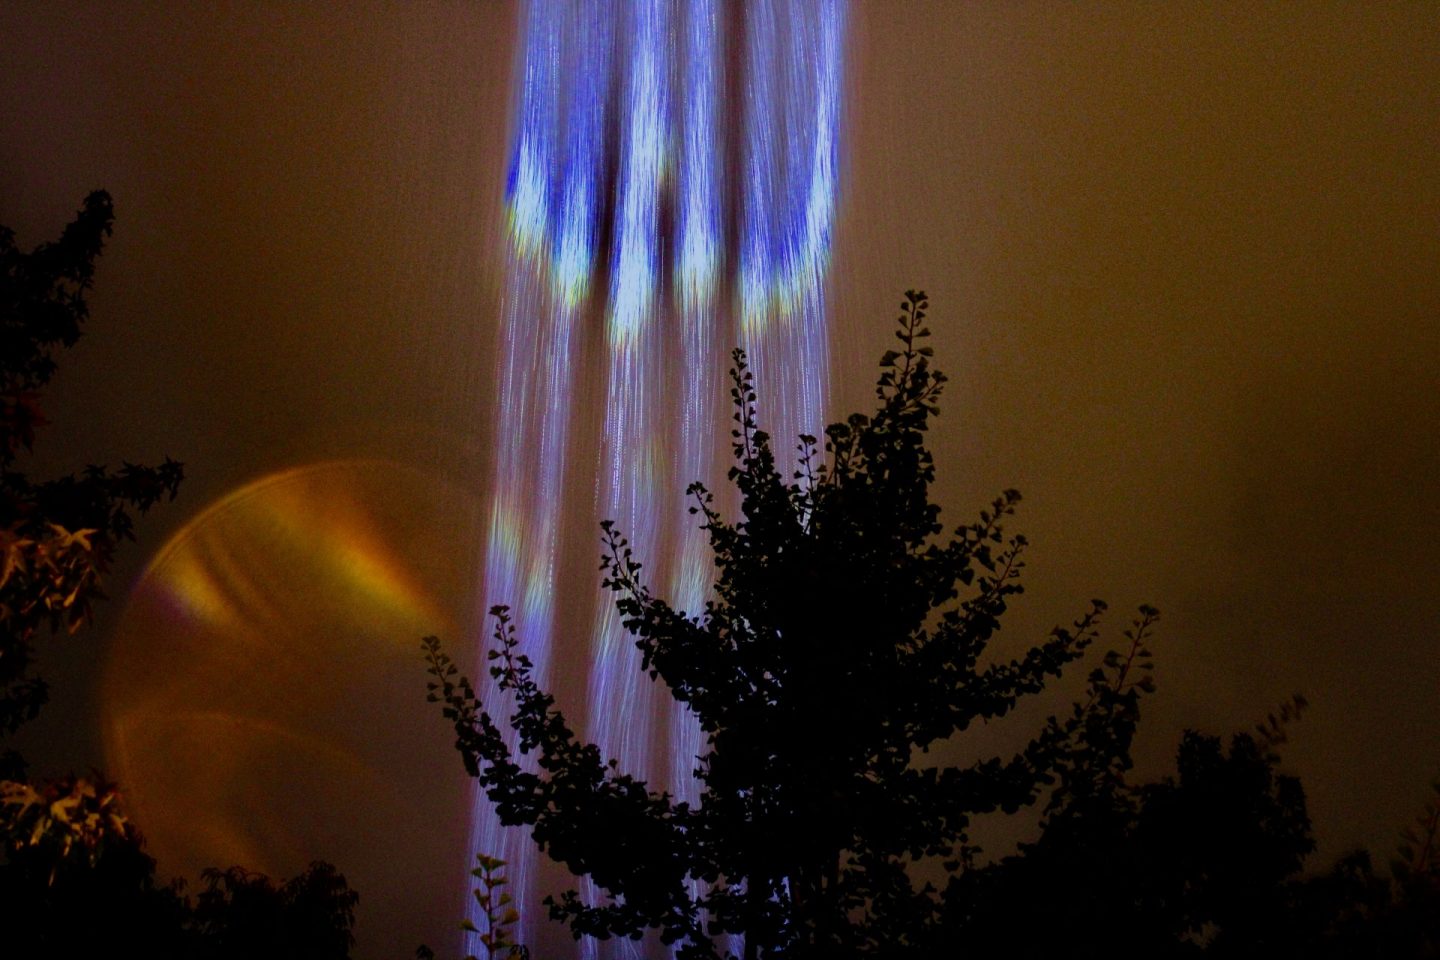 Beams of blue light shooting up into the sky, showing rain droplets amongst the light. The sky is dark and the shadow of a tree is in front of the light. Taken at Leeds Light Night.